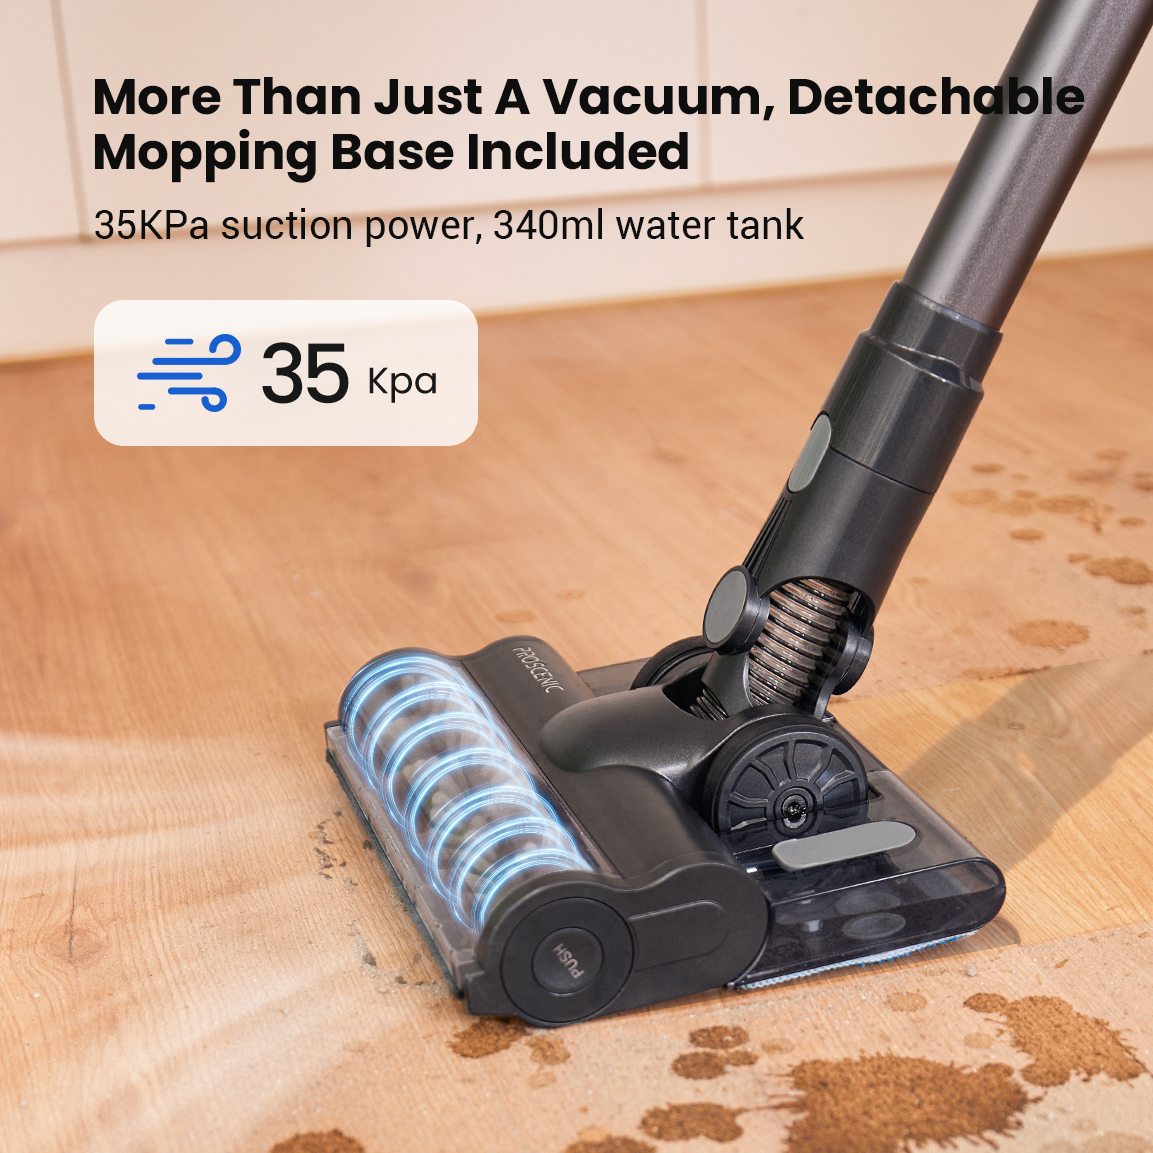 Proscenic P11 vacuum review: convenient and affordable